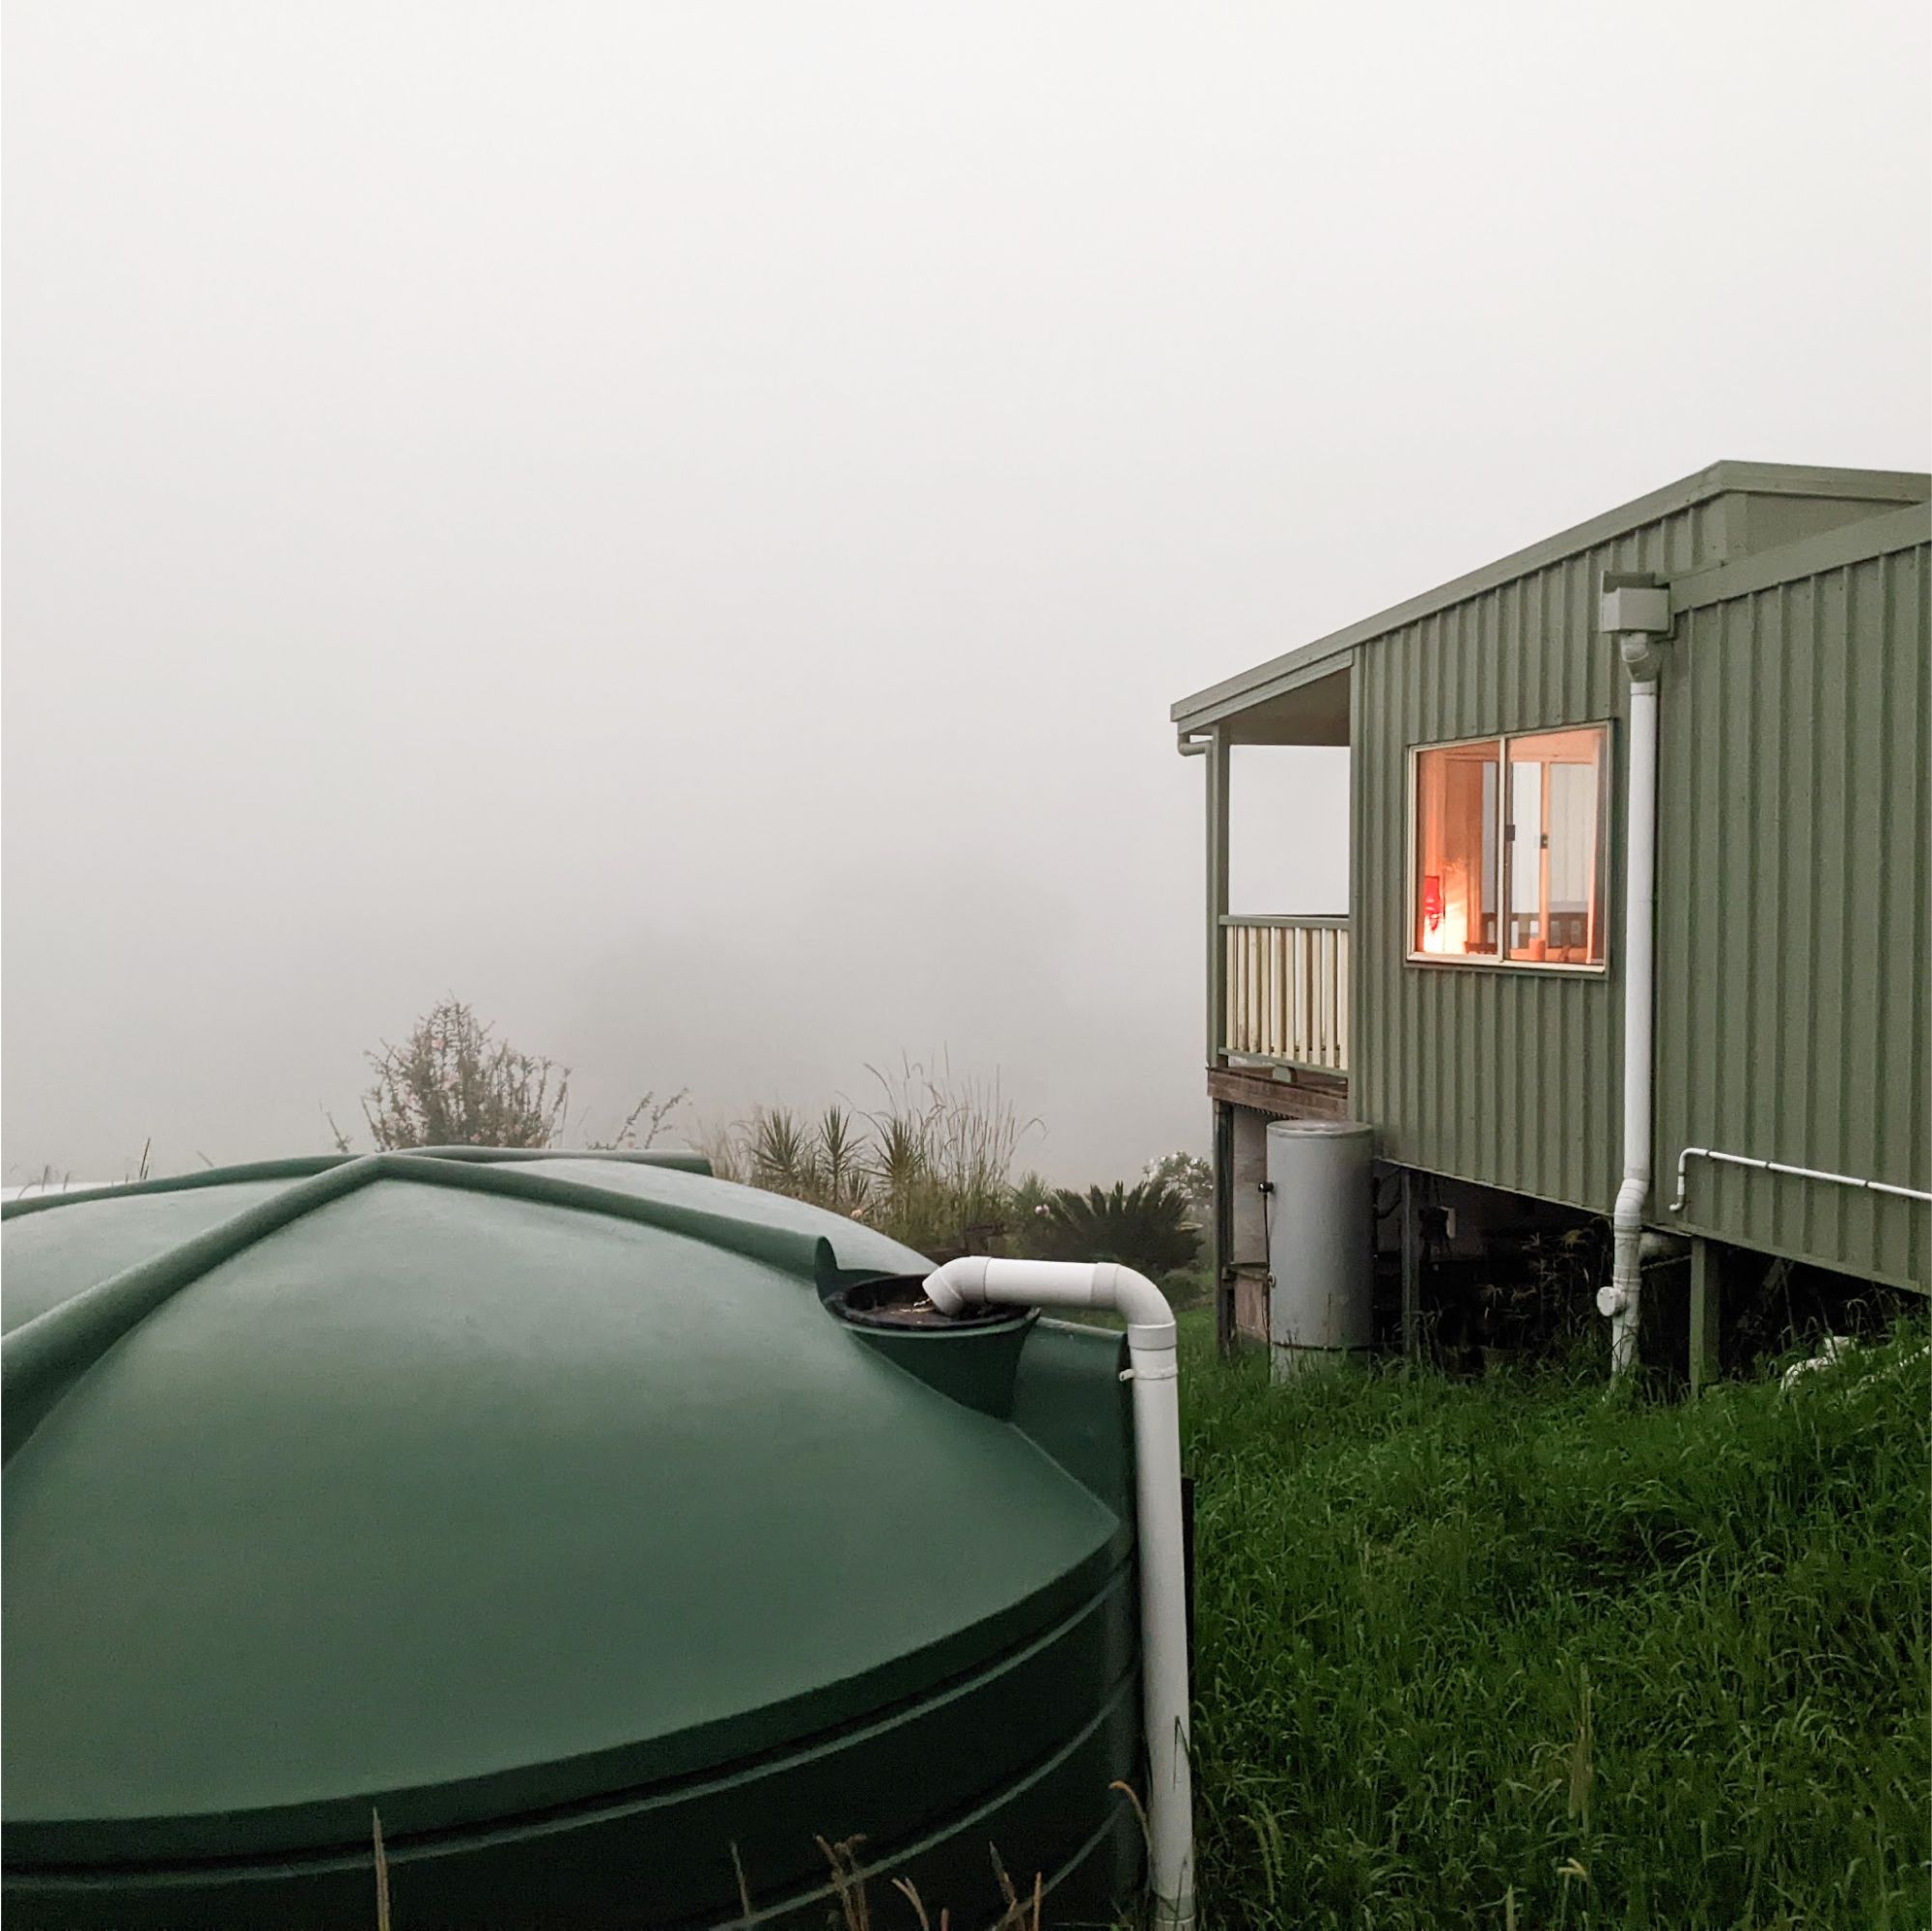 The Shedhouse - side view in the fog